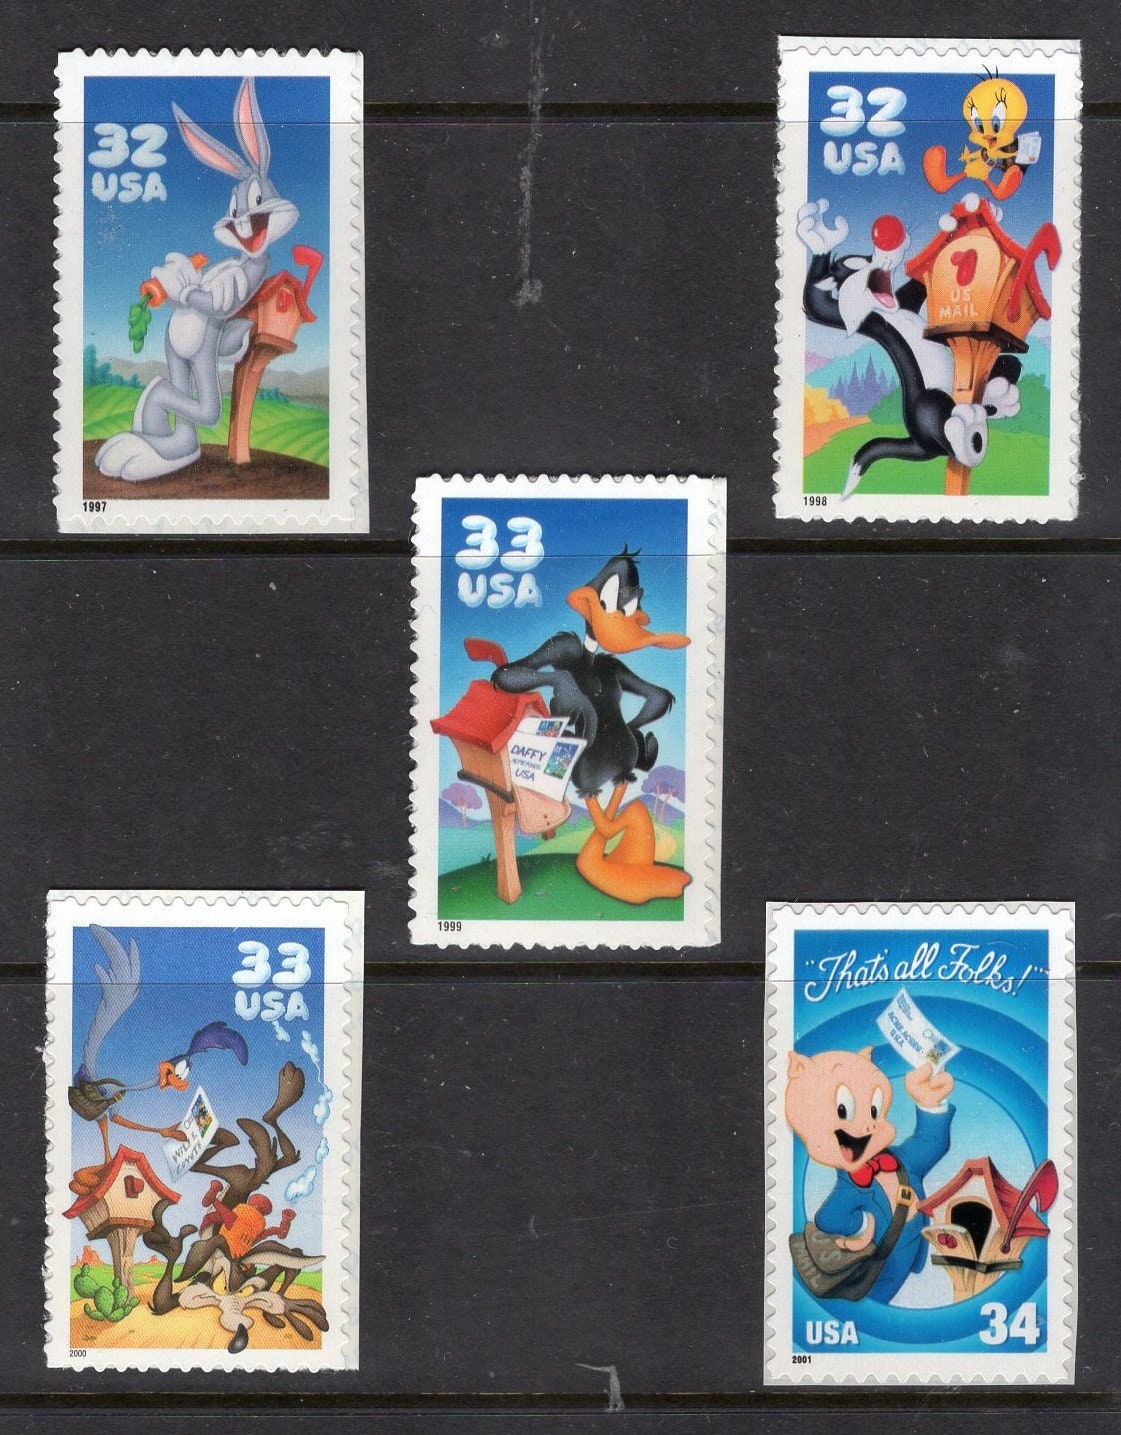 LOONEY TUNES COMPLETE Collection of 5 Stamps - Unused Fresh Bright USA Postage - Issued in 1997//2001 - s3137//3534 -